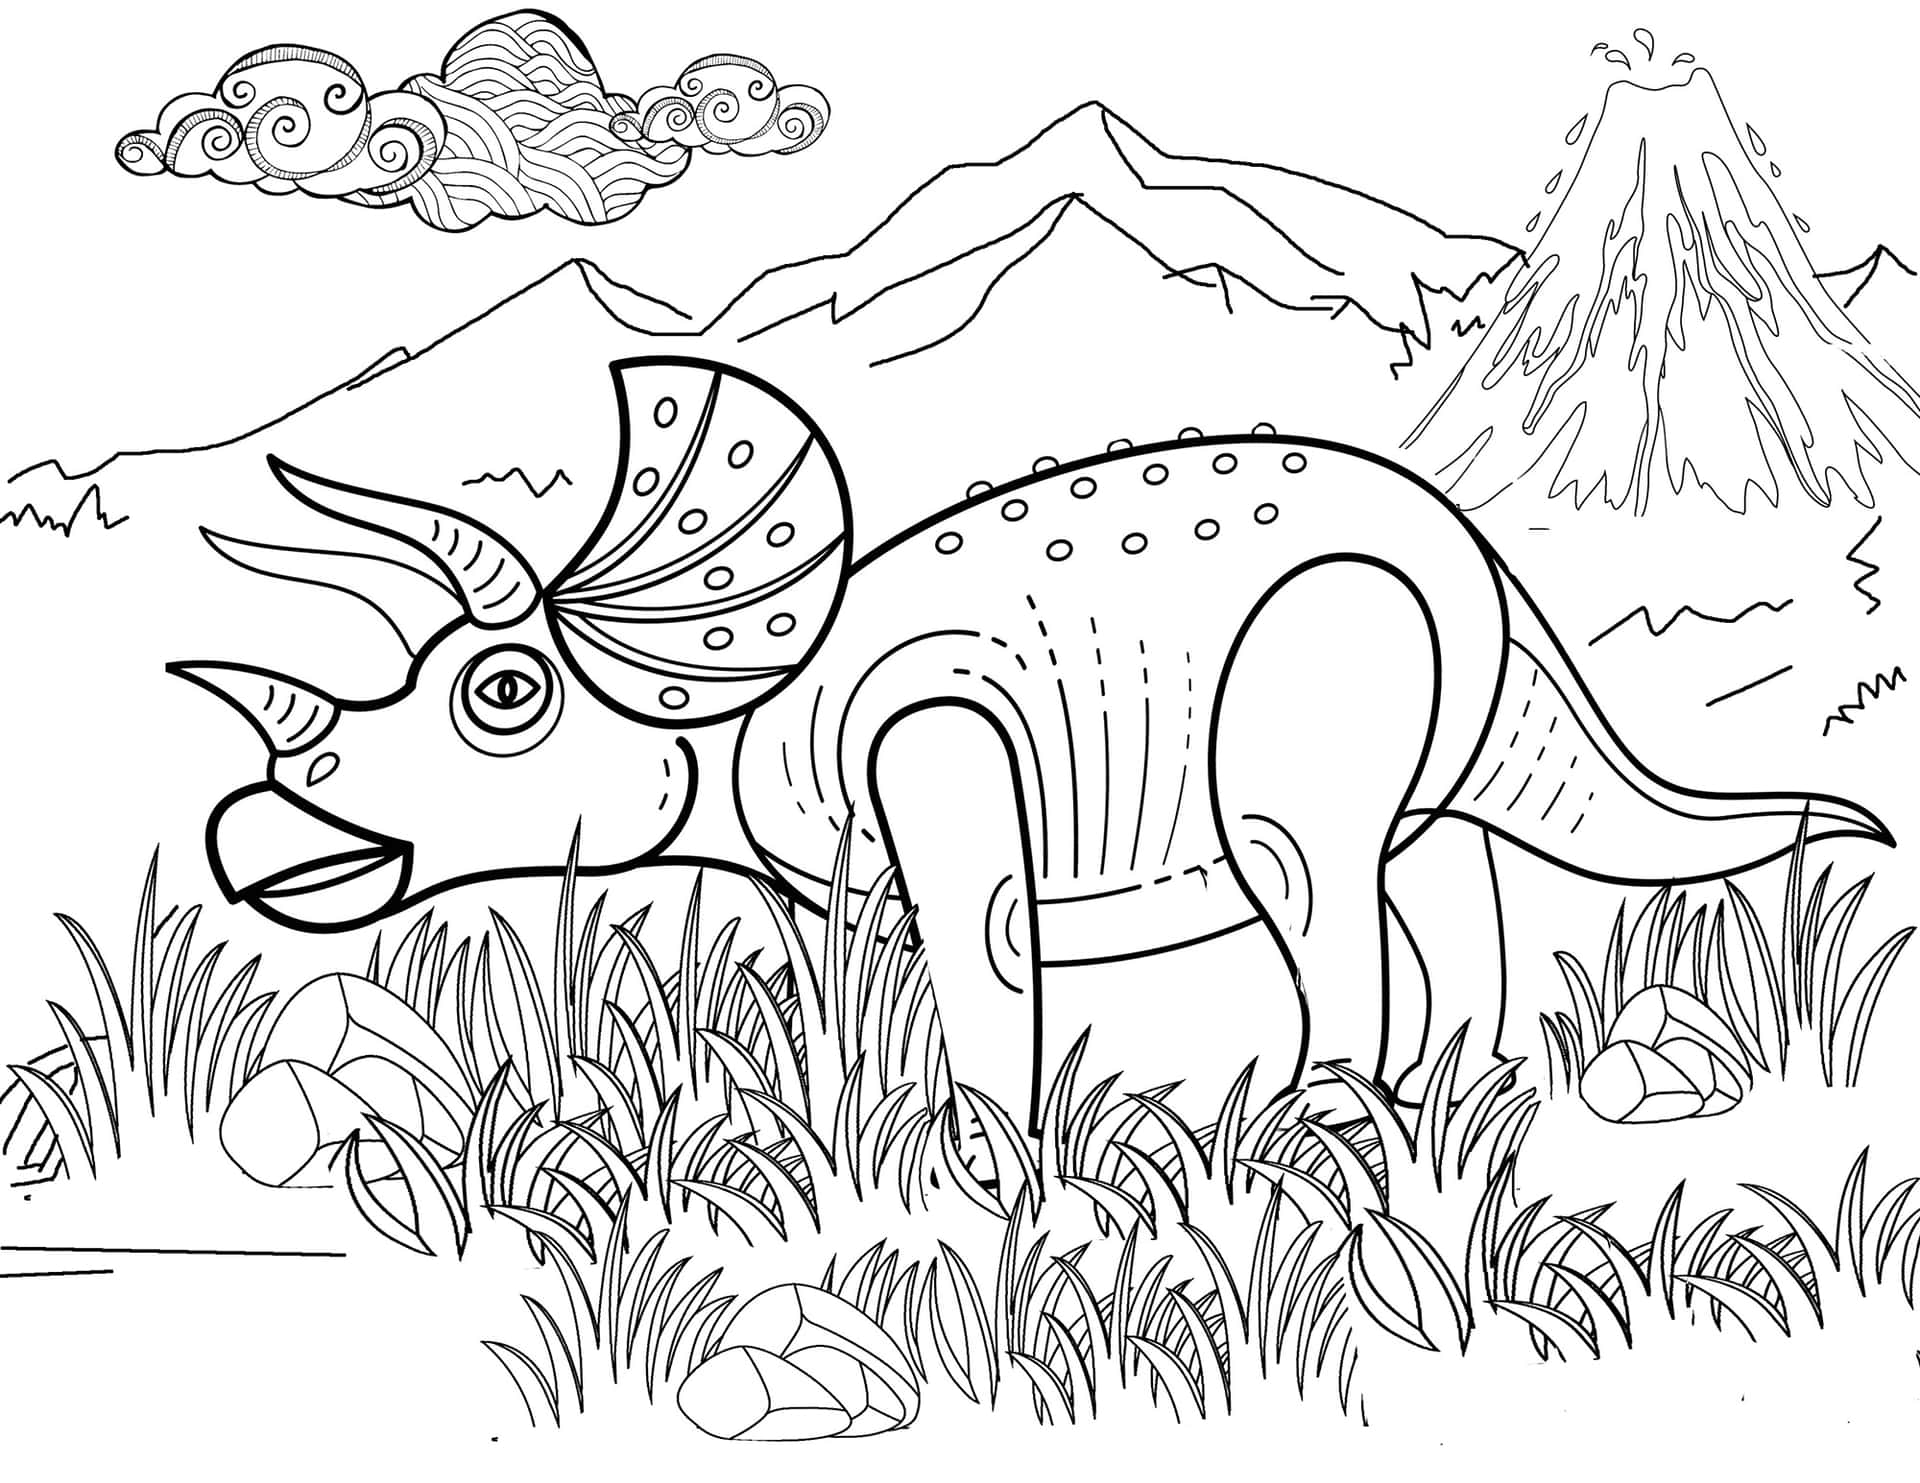 Enjoy a creative afternoon with Dinosaur Coloring Pictures